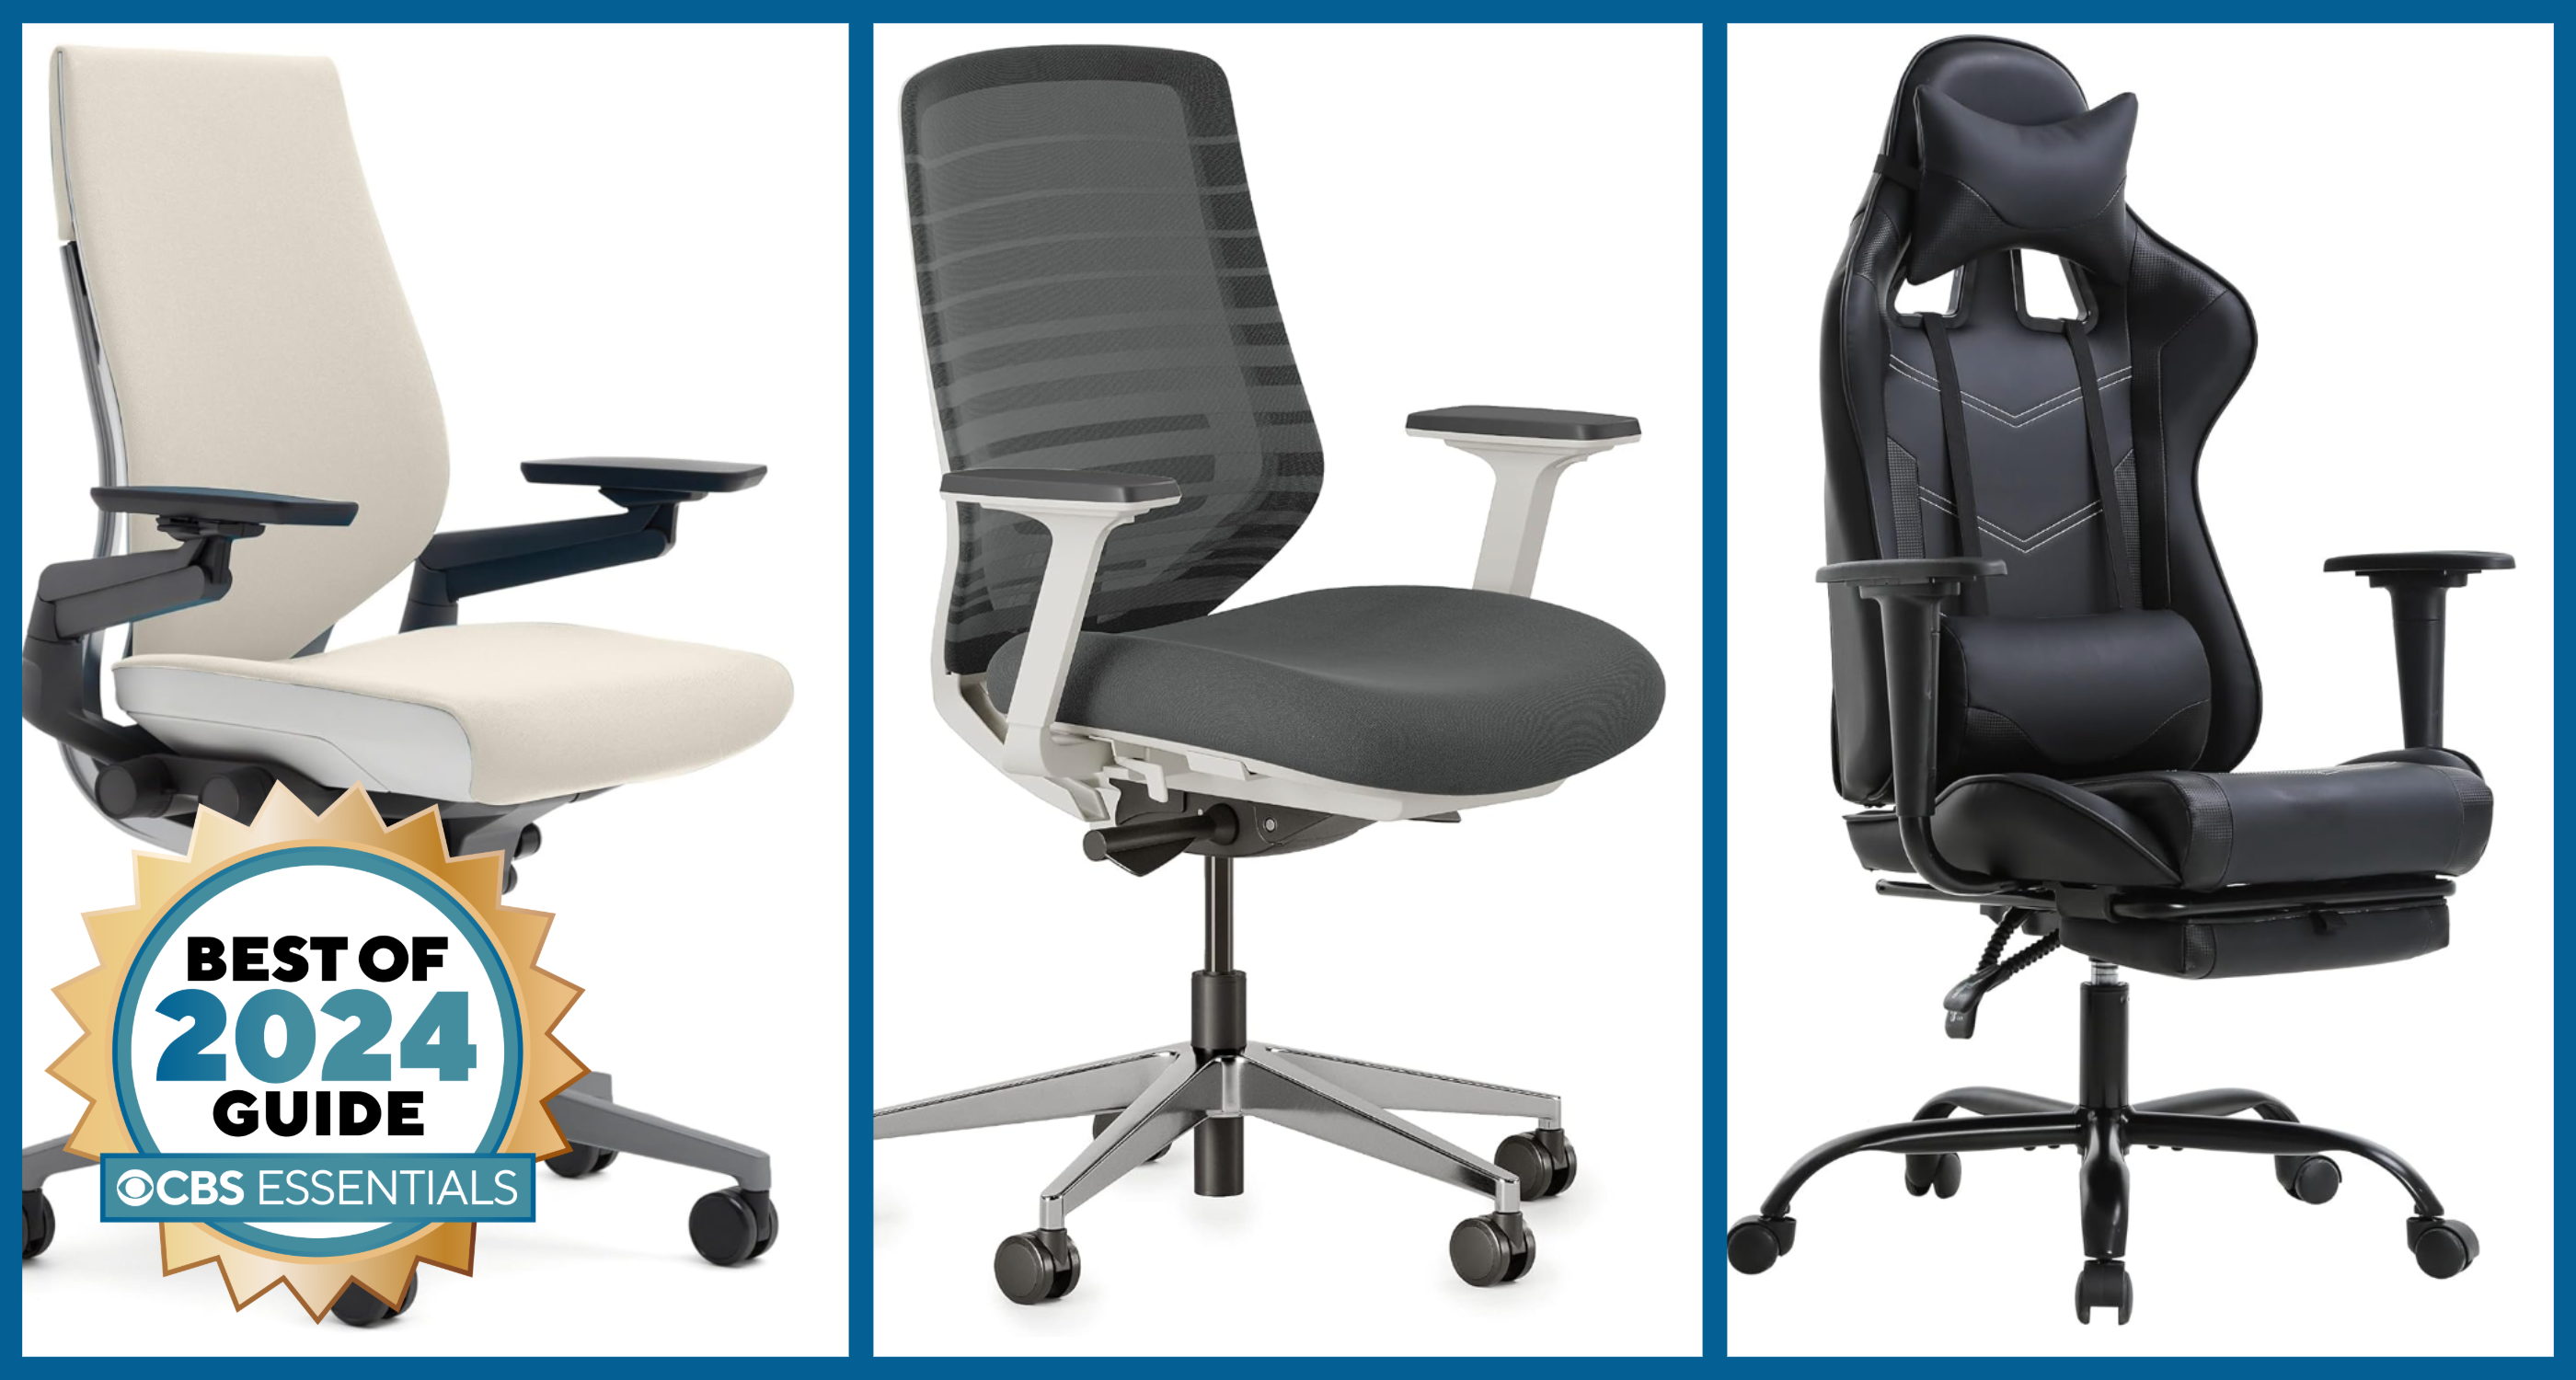 best-ergonomic-chairs-2024.png 